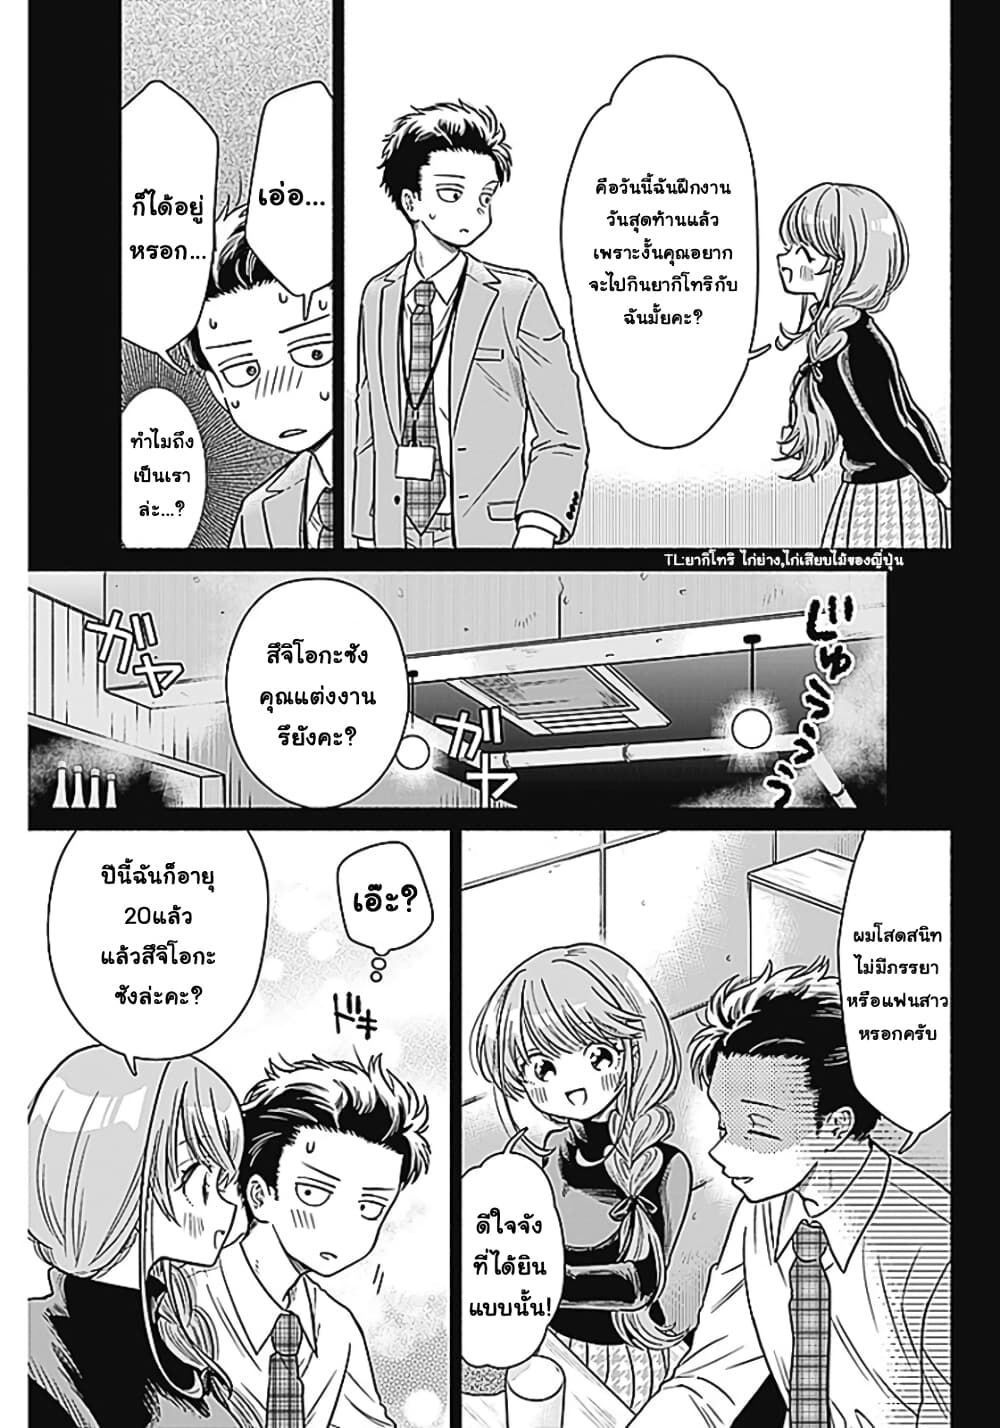 Marriage Gray 1 (6)